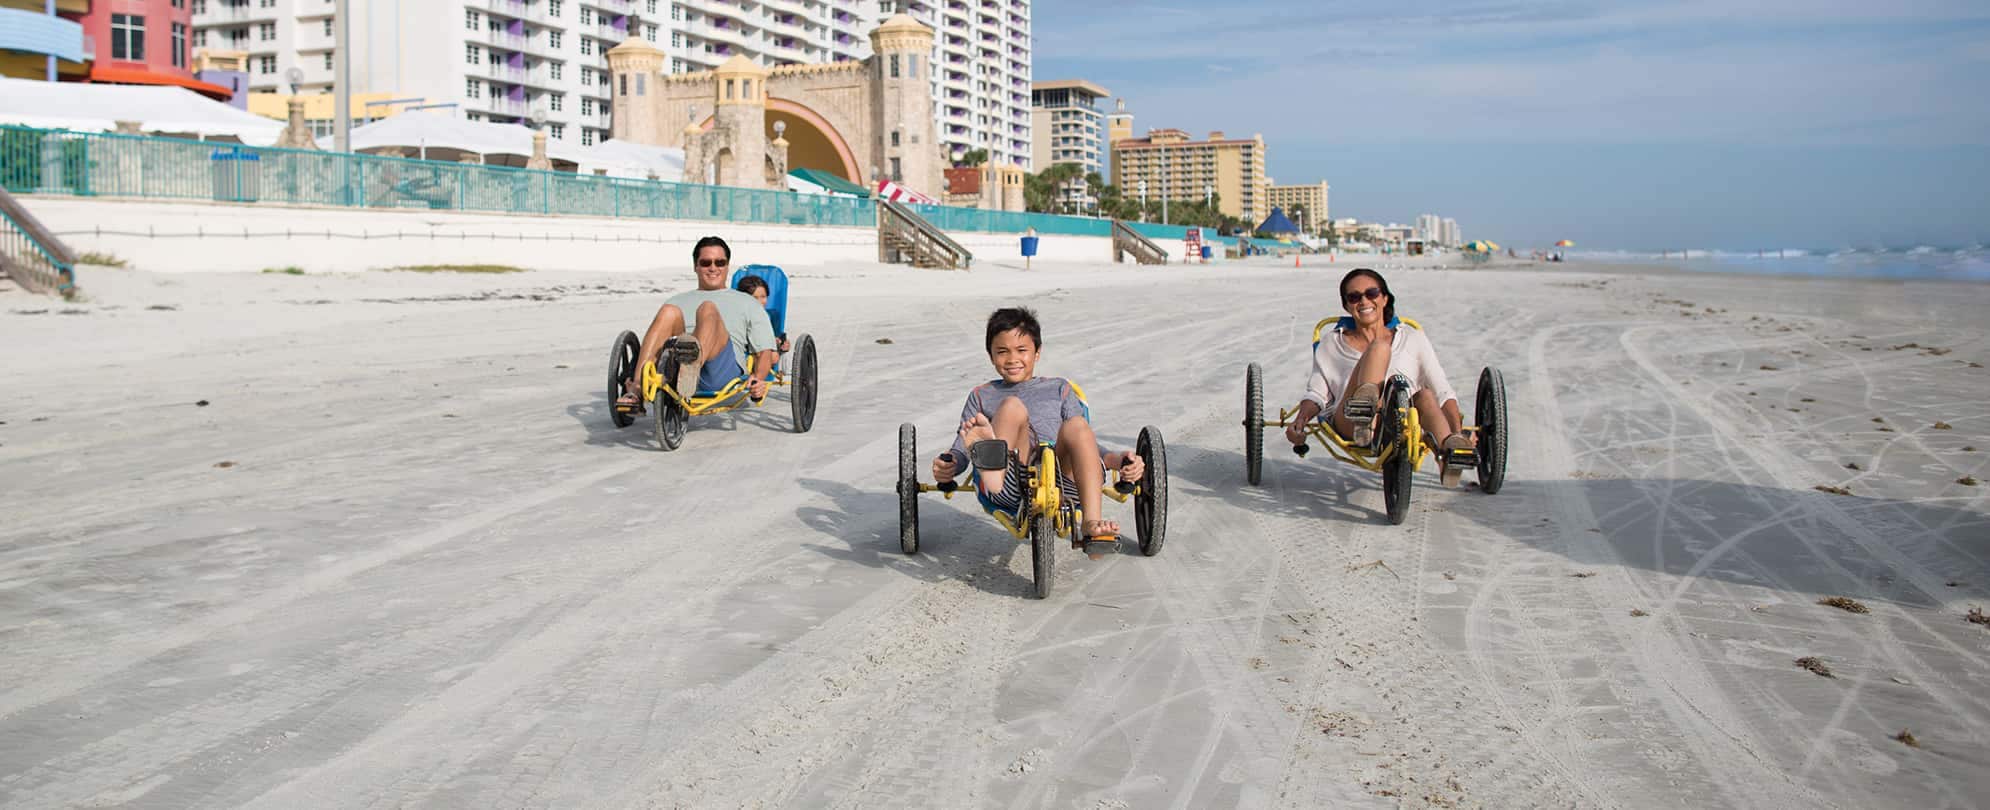 Family of four riding yellow tricycles on the beach 